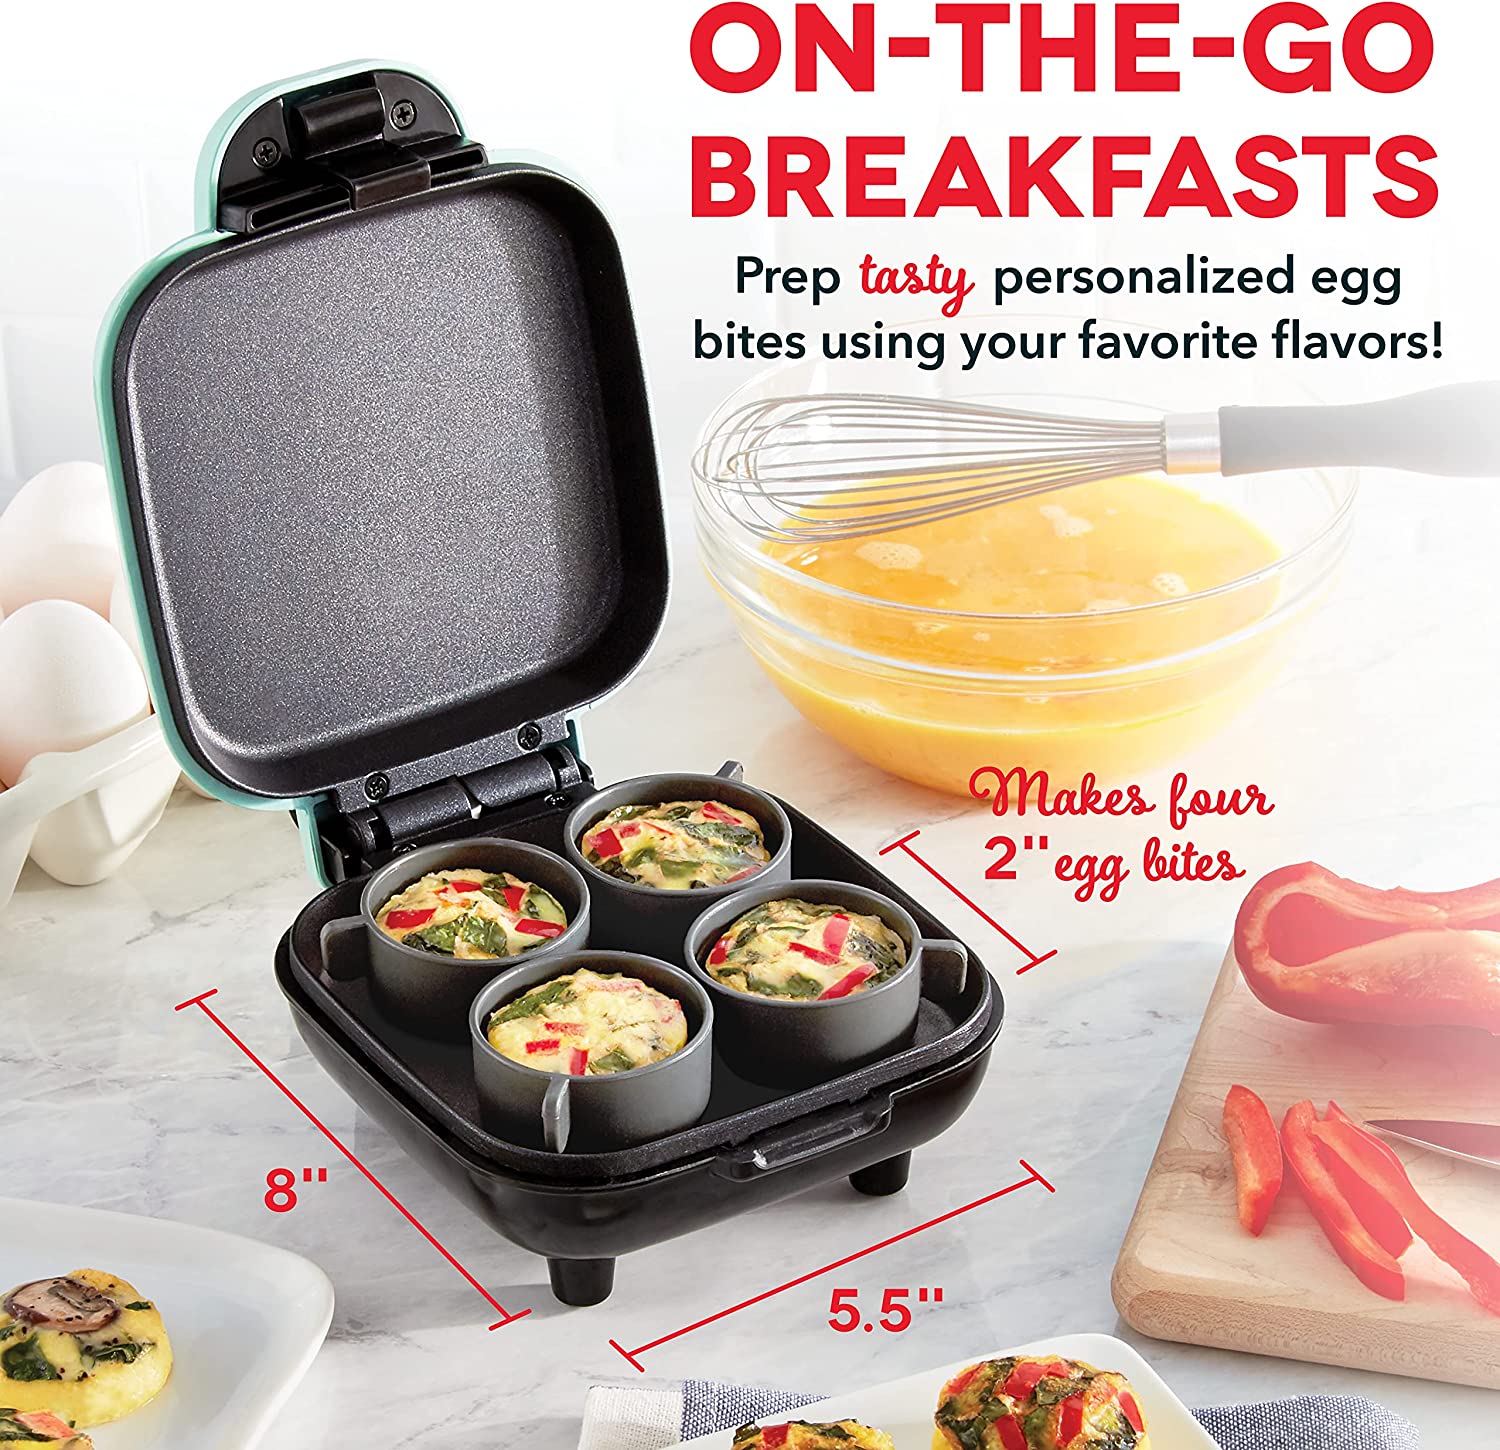 An open egg sandwich cooker with 4 ready-made egg bites inside the cooker. There is text which says, 'On the go breakfasts. Prep tasty personalized egg bites using your favorite flavors.'